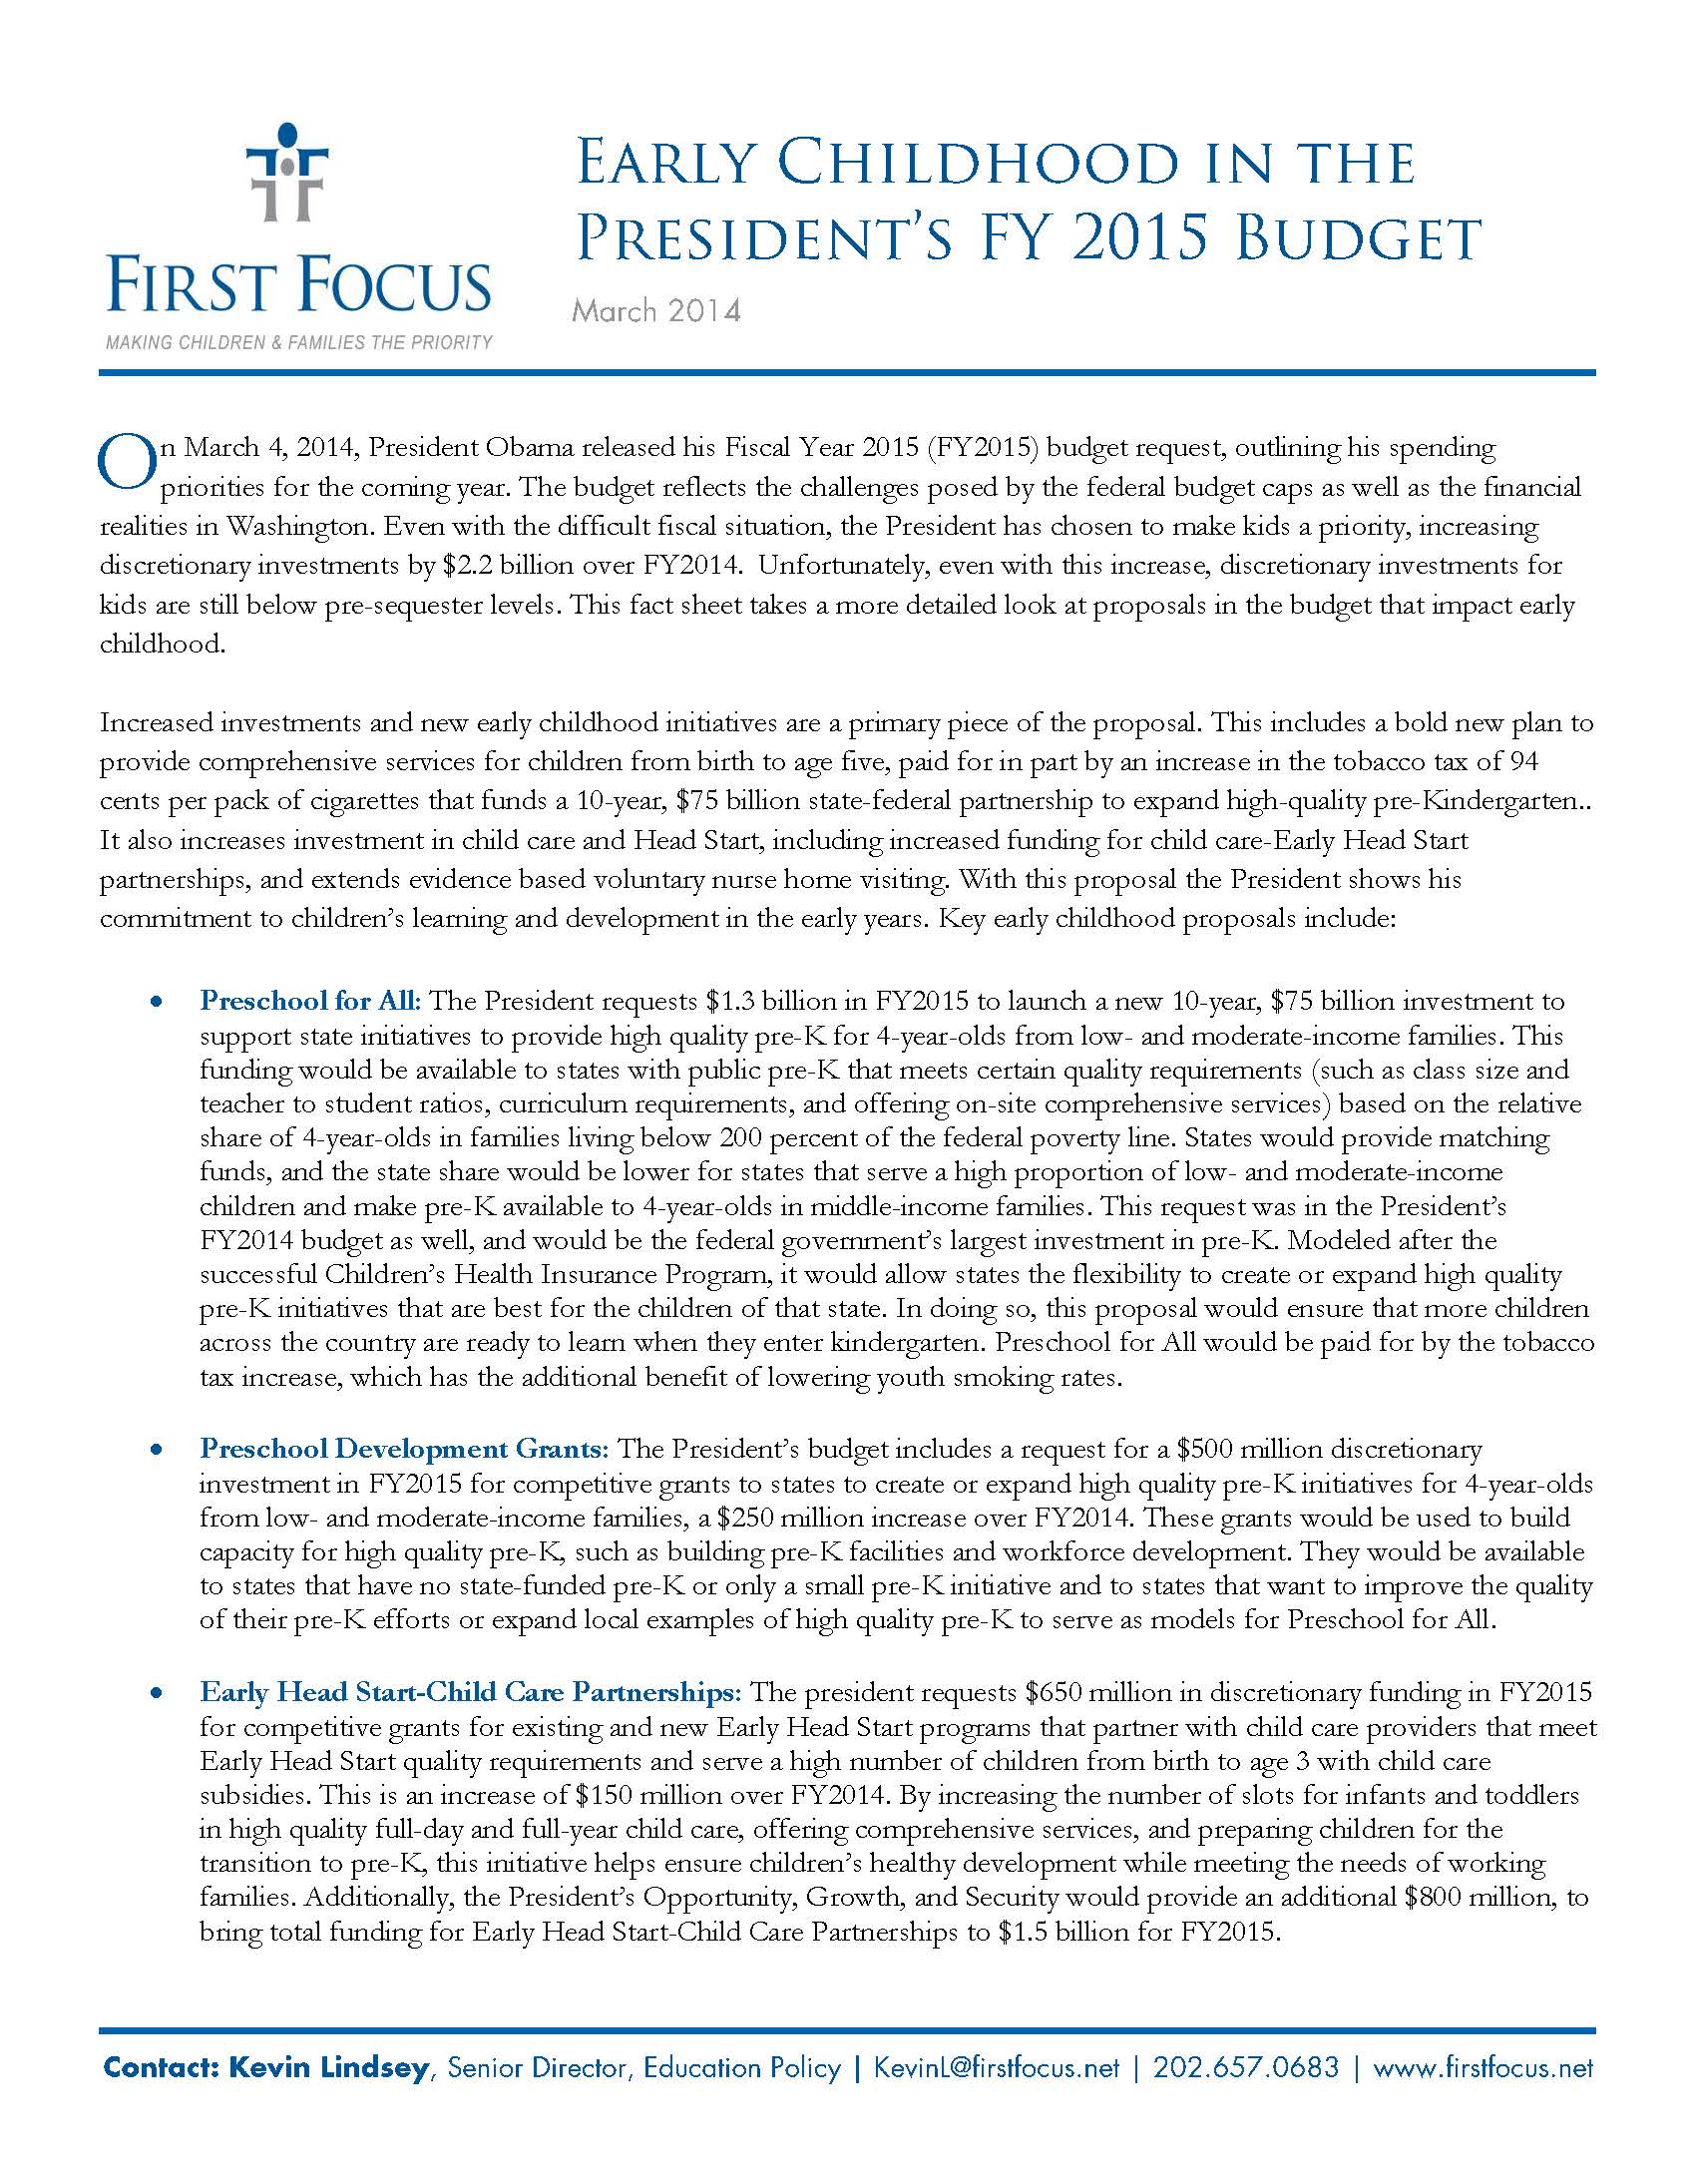 Early Childhood in Presidents FY2015 Budget_Page_1